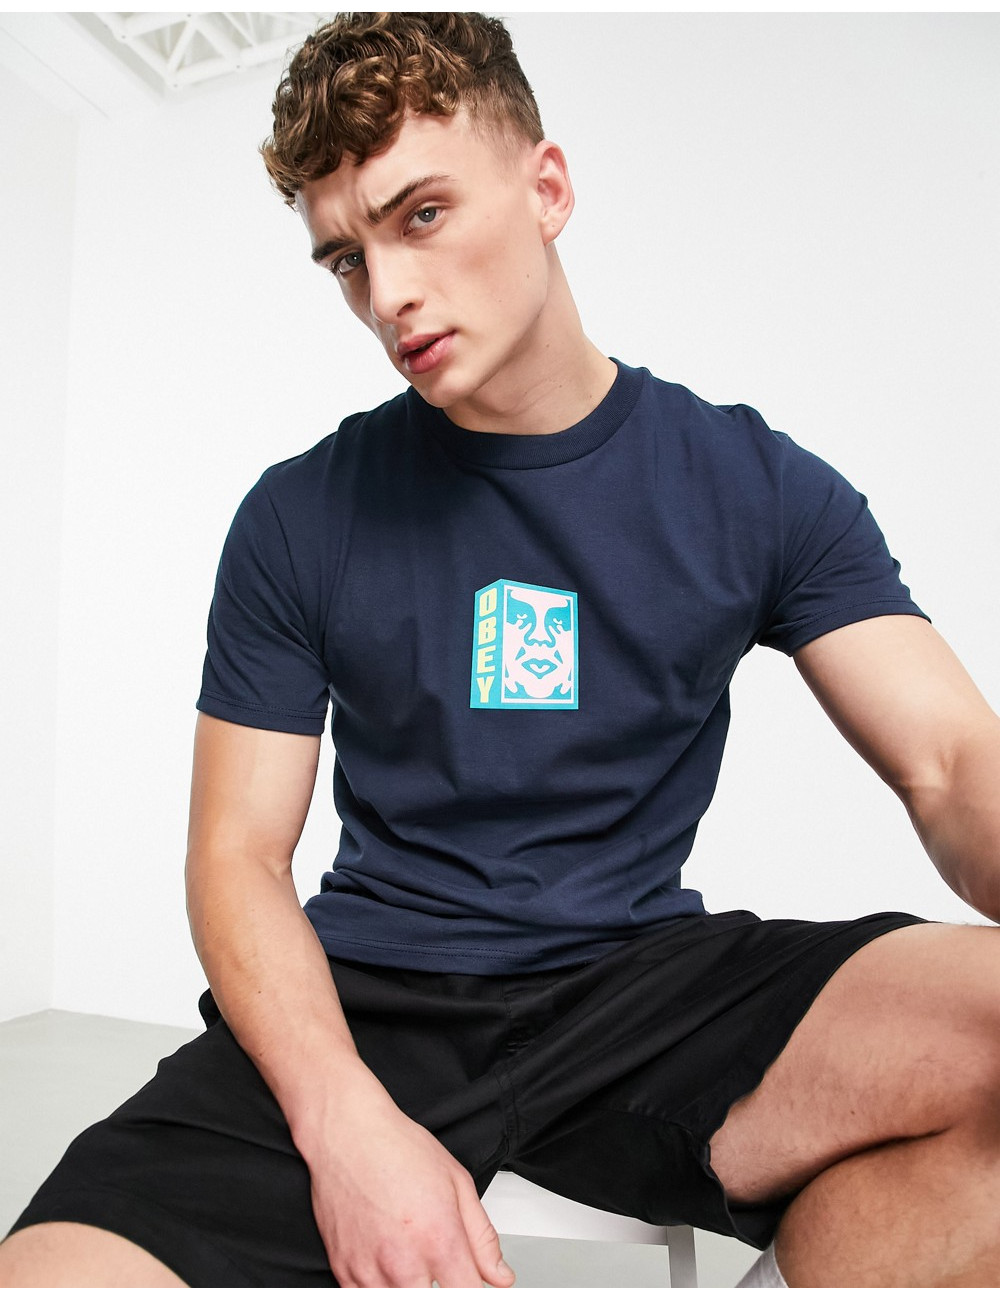 Obey face logo t-shirt in navy